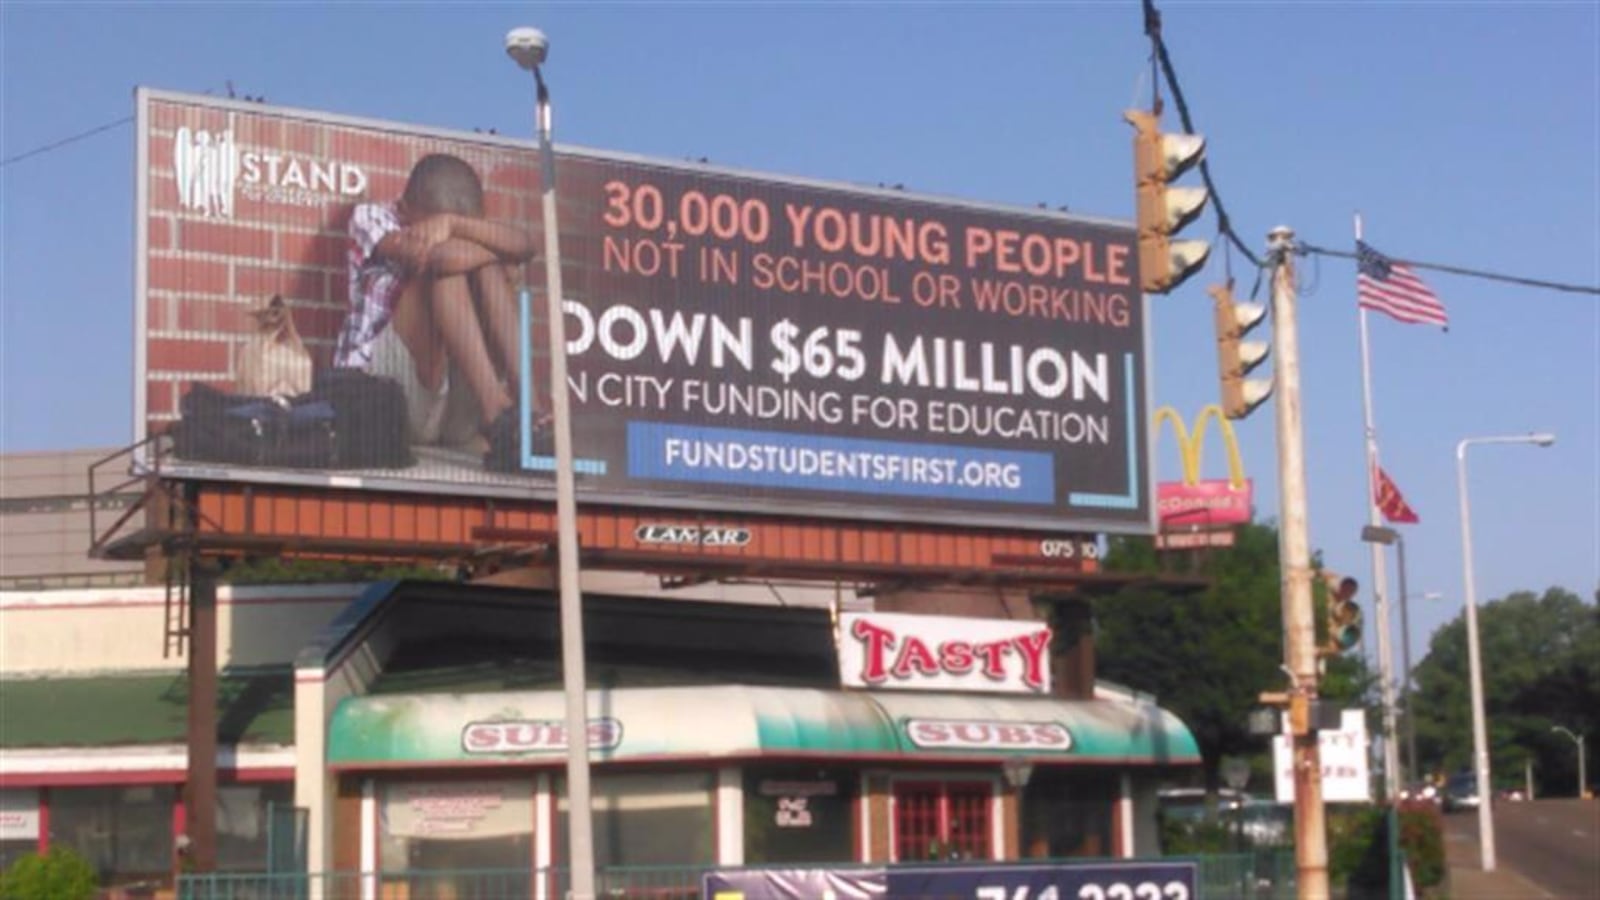 A 2017 billboard campaign, paid for by Stand for Children, highlights an ongoing frustration among city, county and school leaders over education funding.